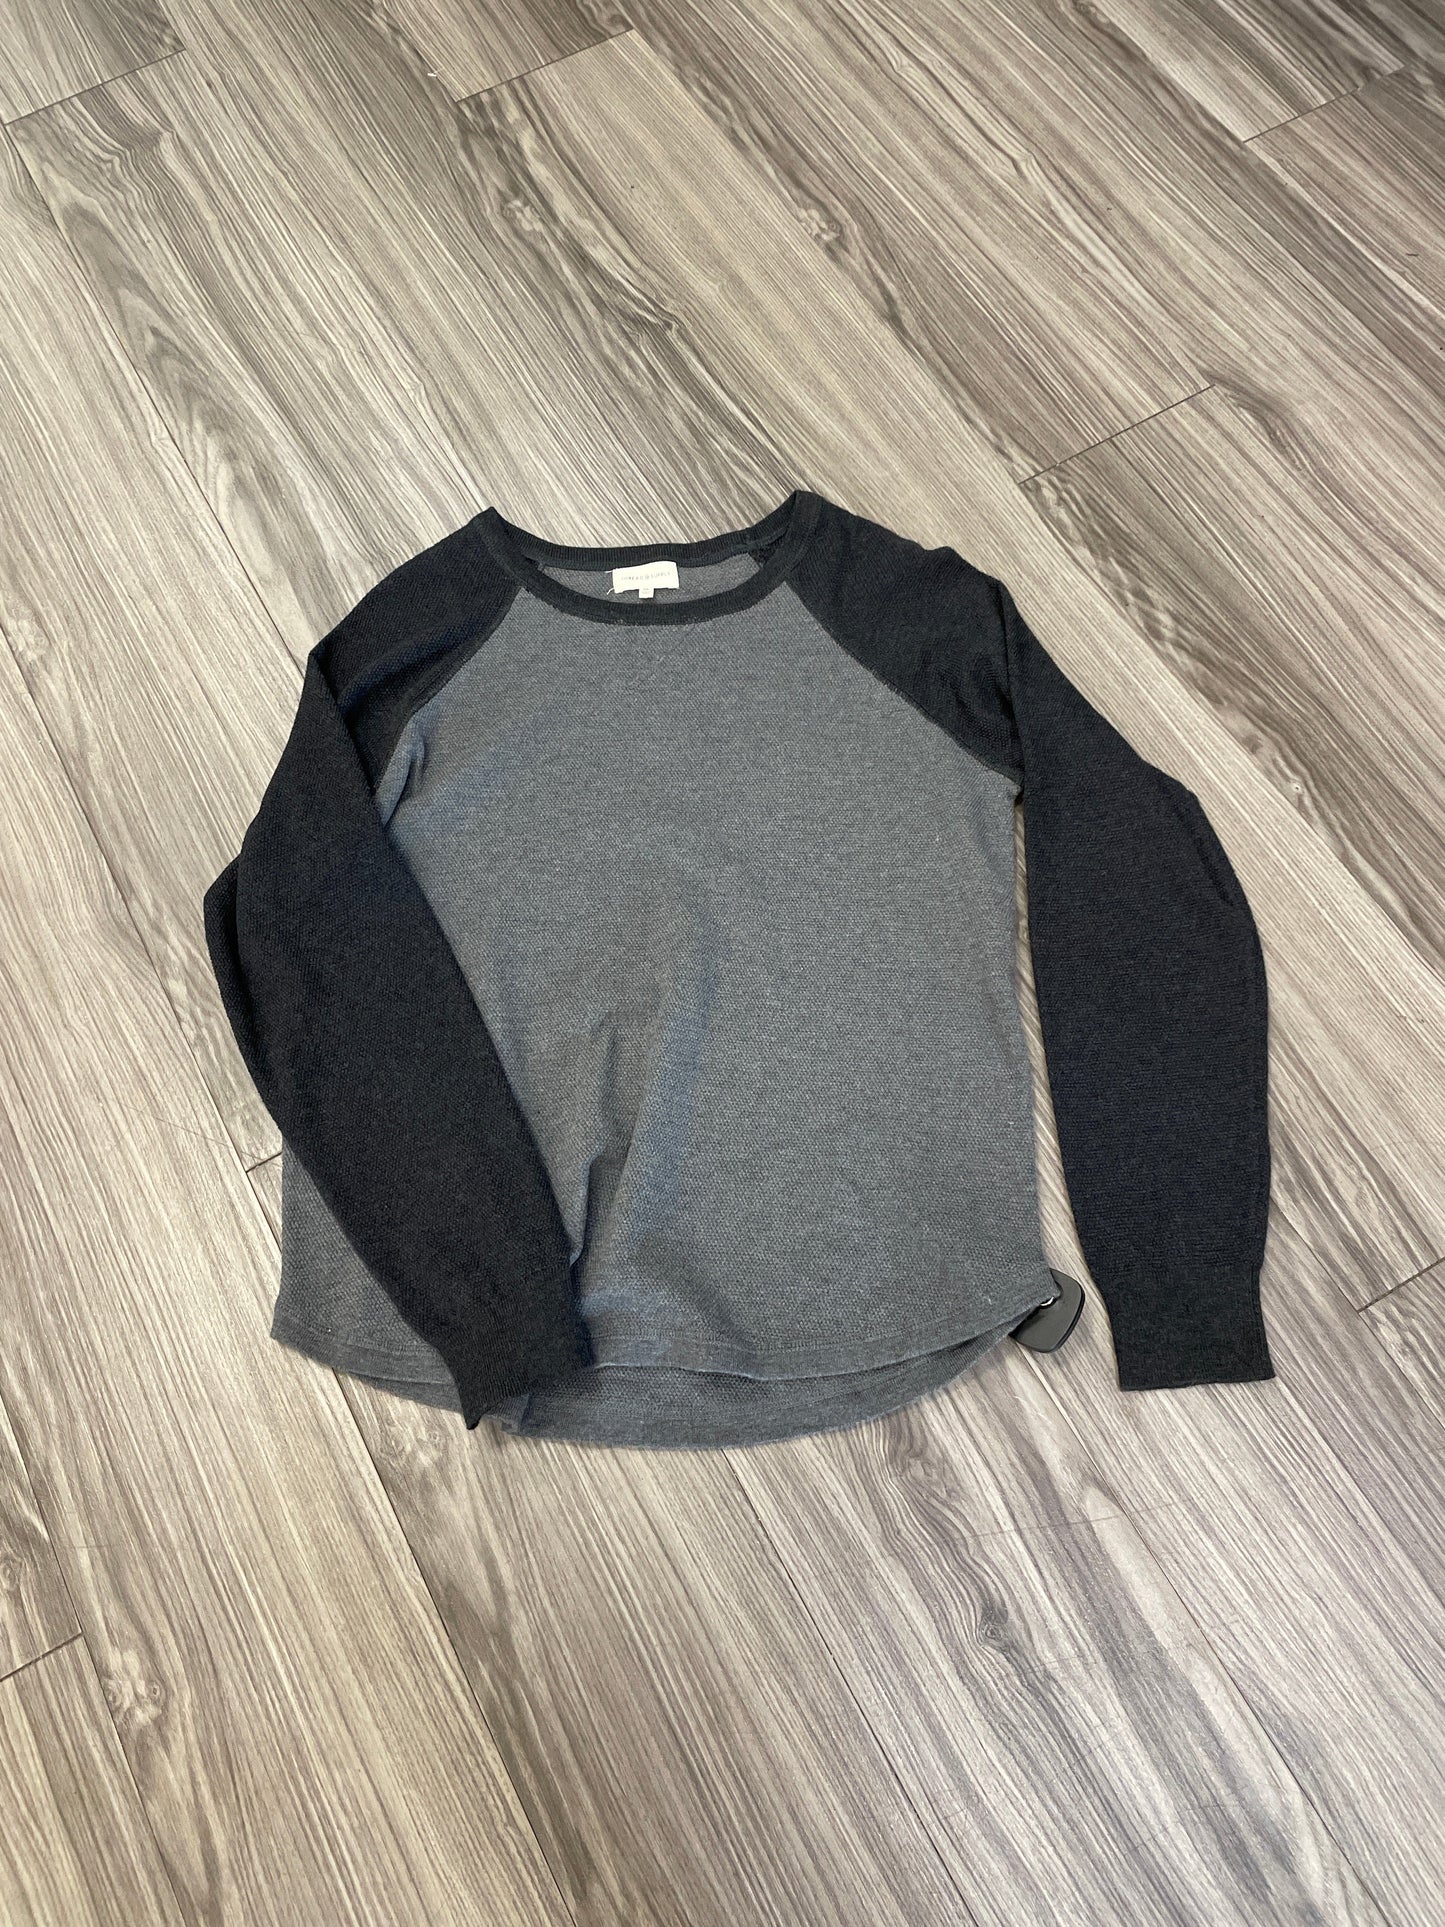 Grey Top Long Sleeve Thread And Supply, Size M